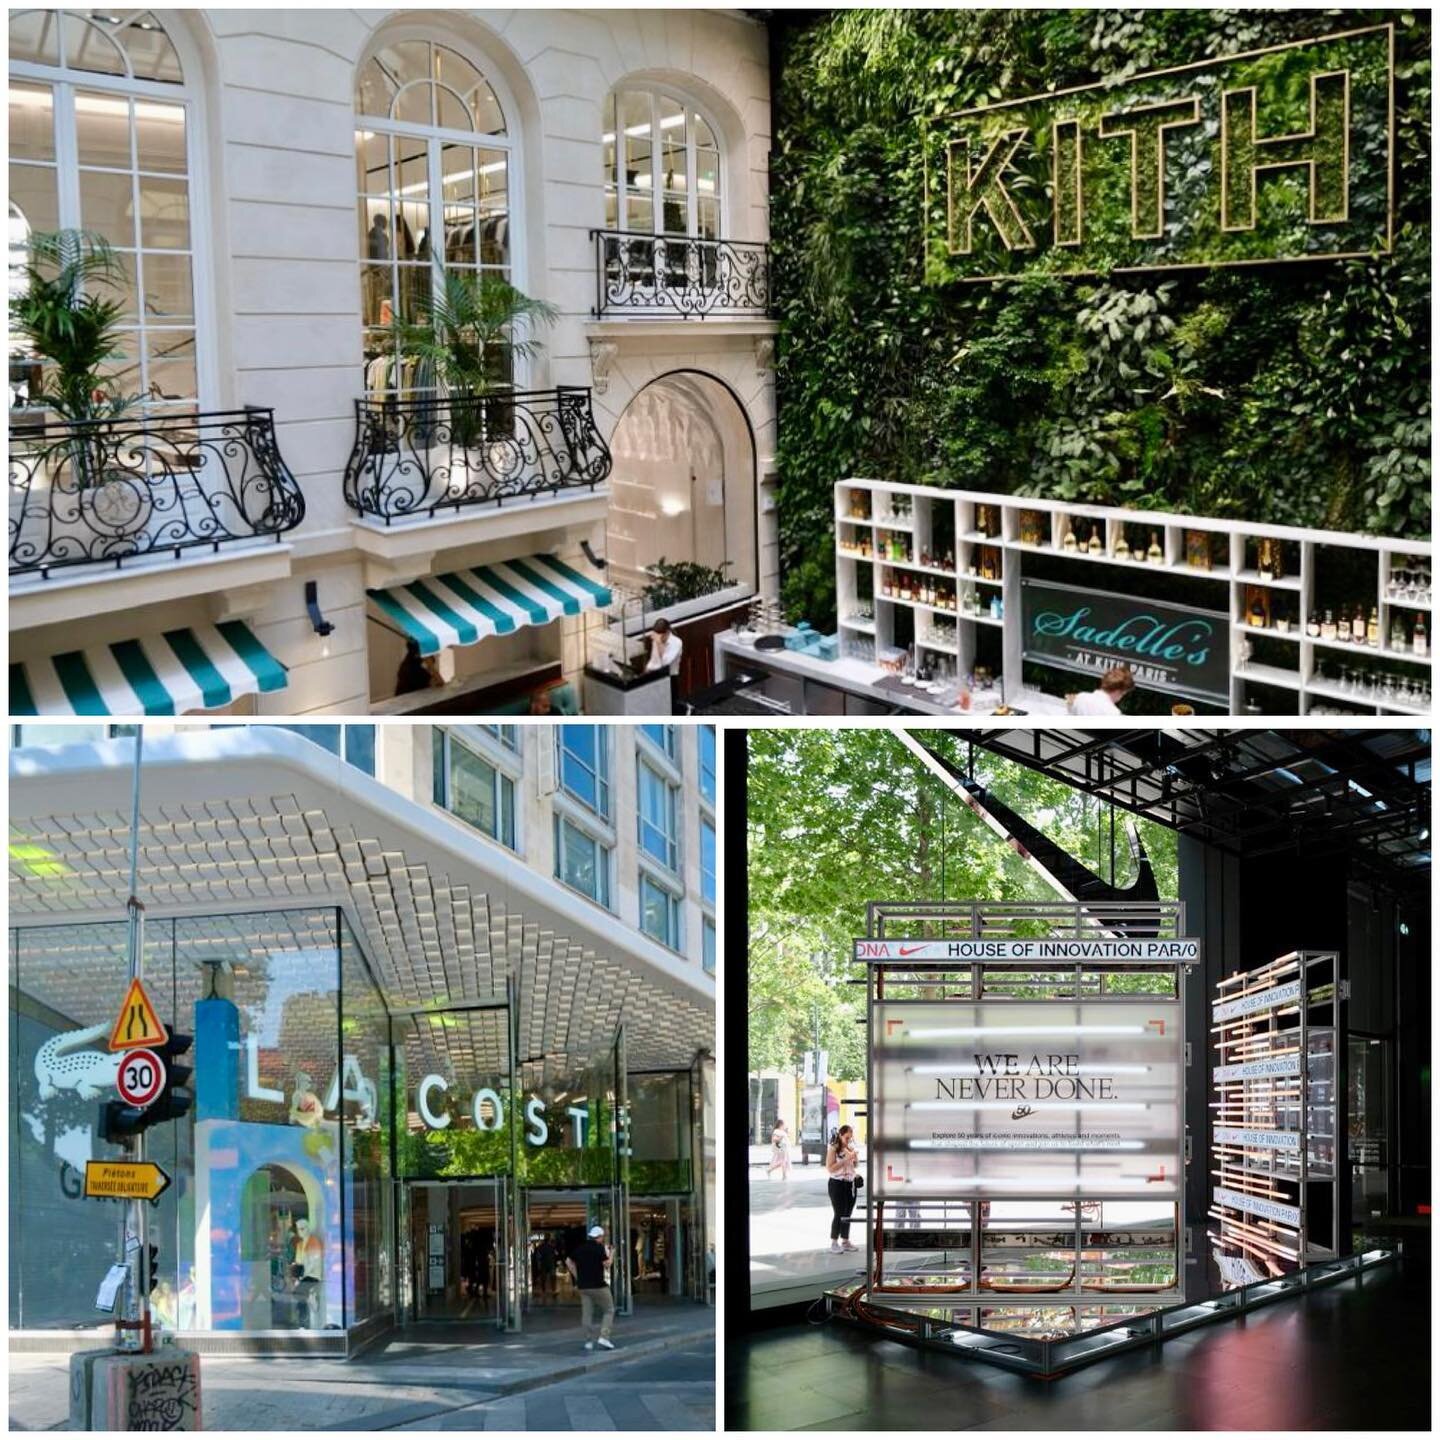 Earlier this month, Kenningham Retail went abroad, this time to Paris! Over the course of a few days the team explored the wide range of retail, leisure and F&amp;B that the city has to offer. It&rsquo;s eclectic mix of brands and architecture was im